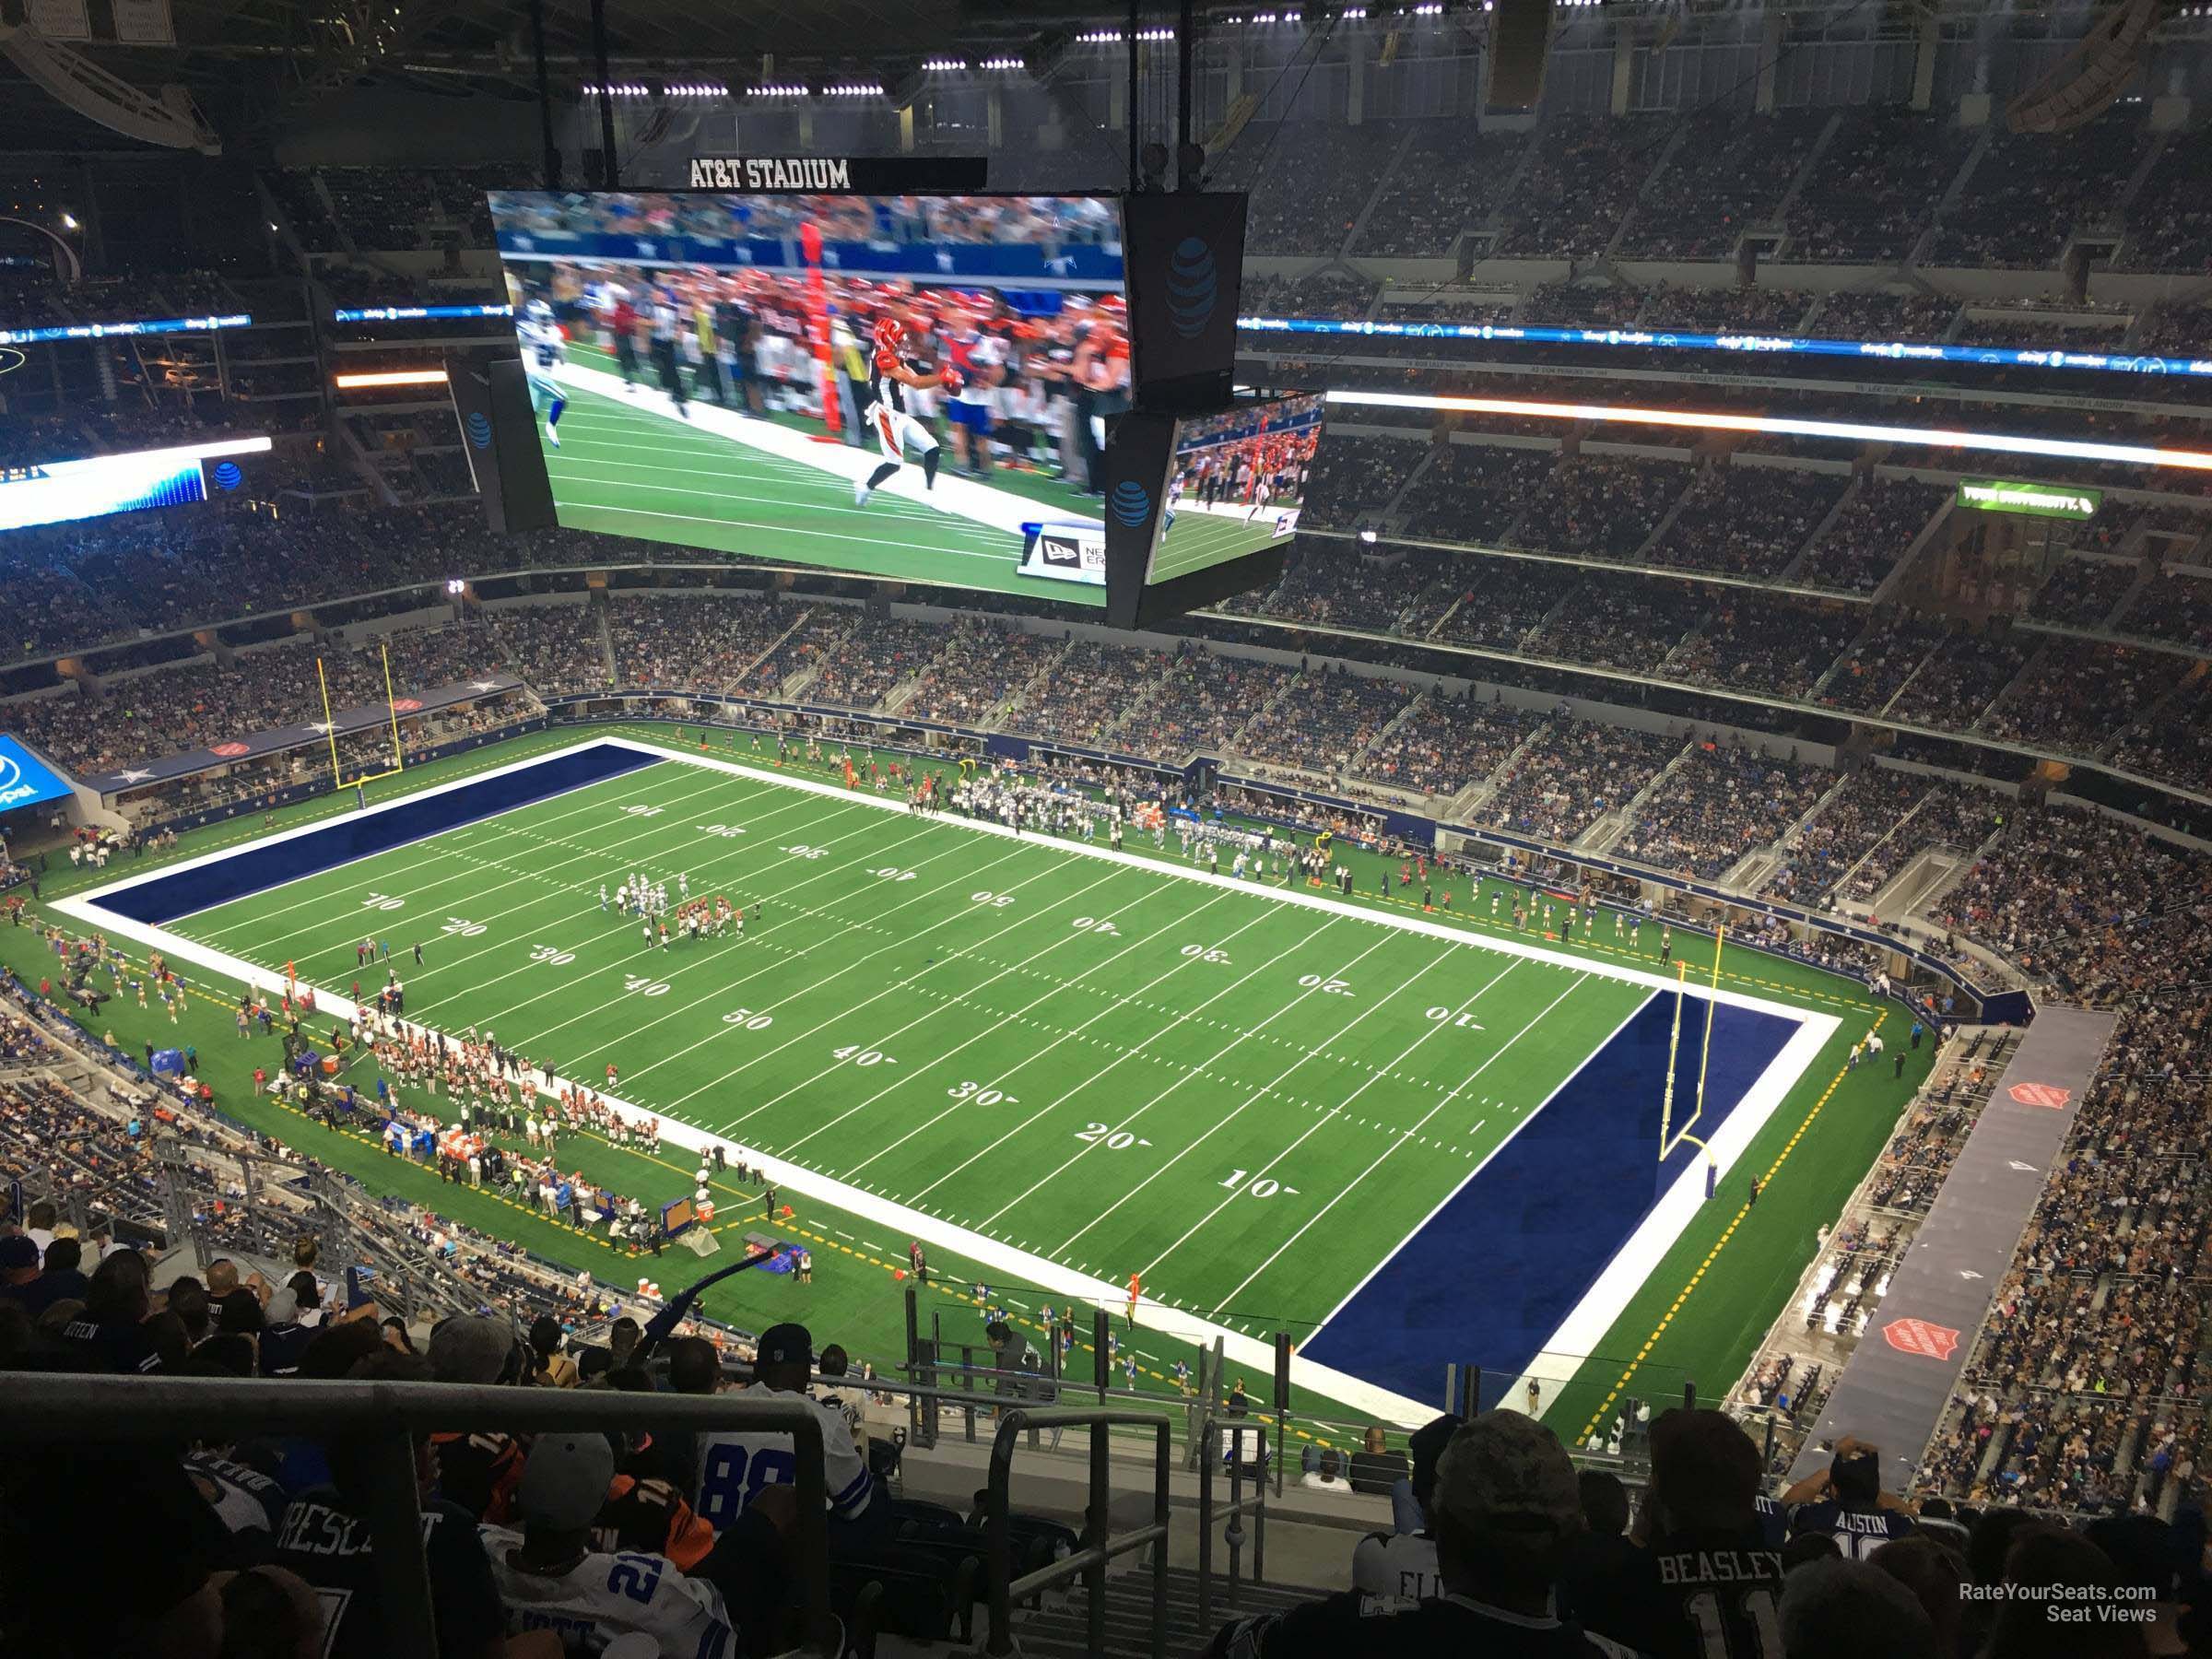 section 426, row 22 seat view  for football - at&t stadium (cowboys stadium)